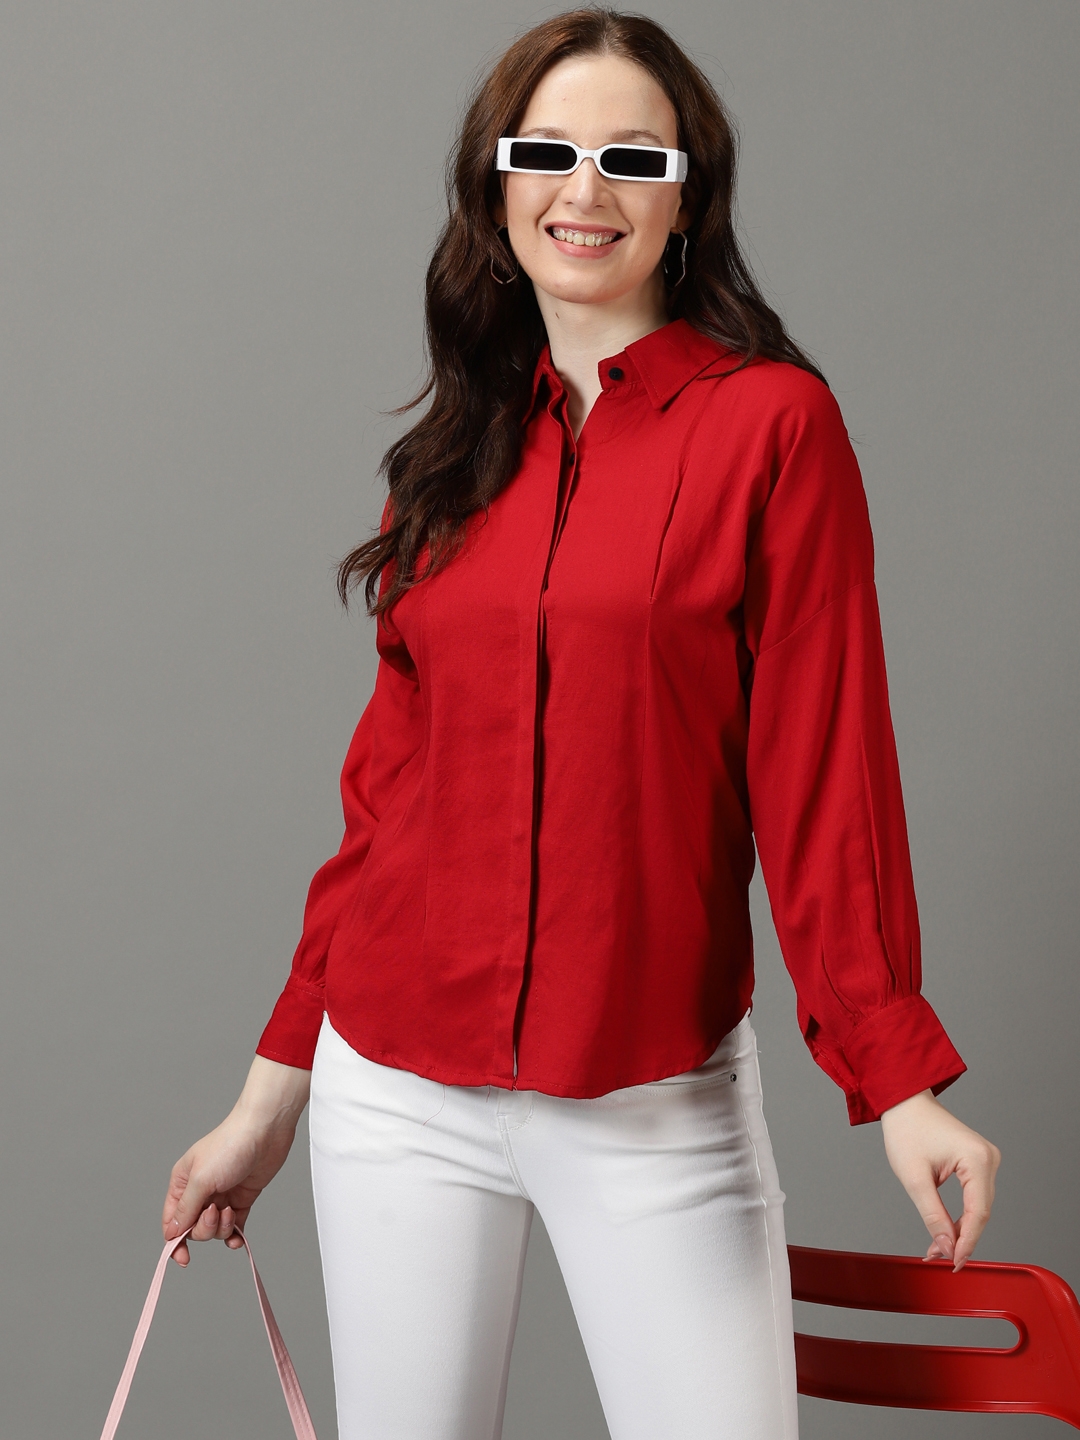 SHOWOFF Women's Spread Collar Solid Long Sleeves Red Shirt